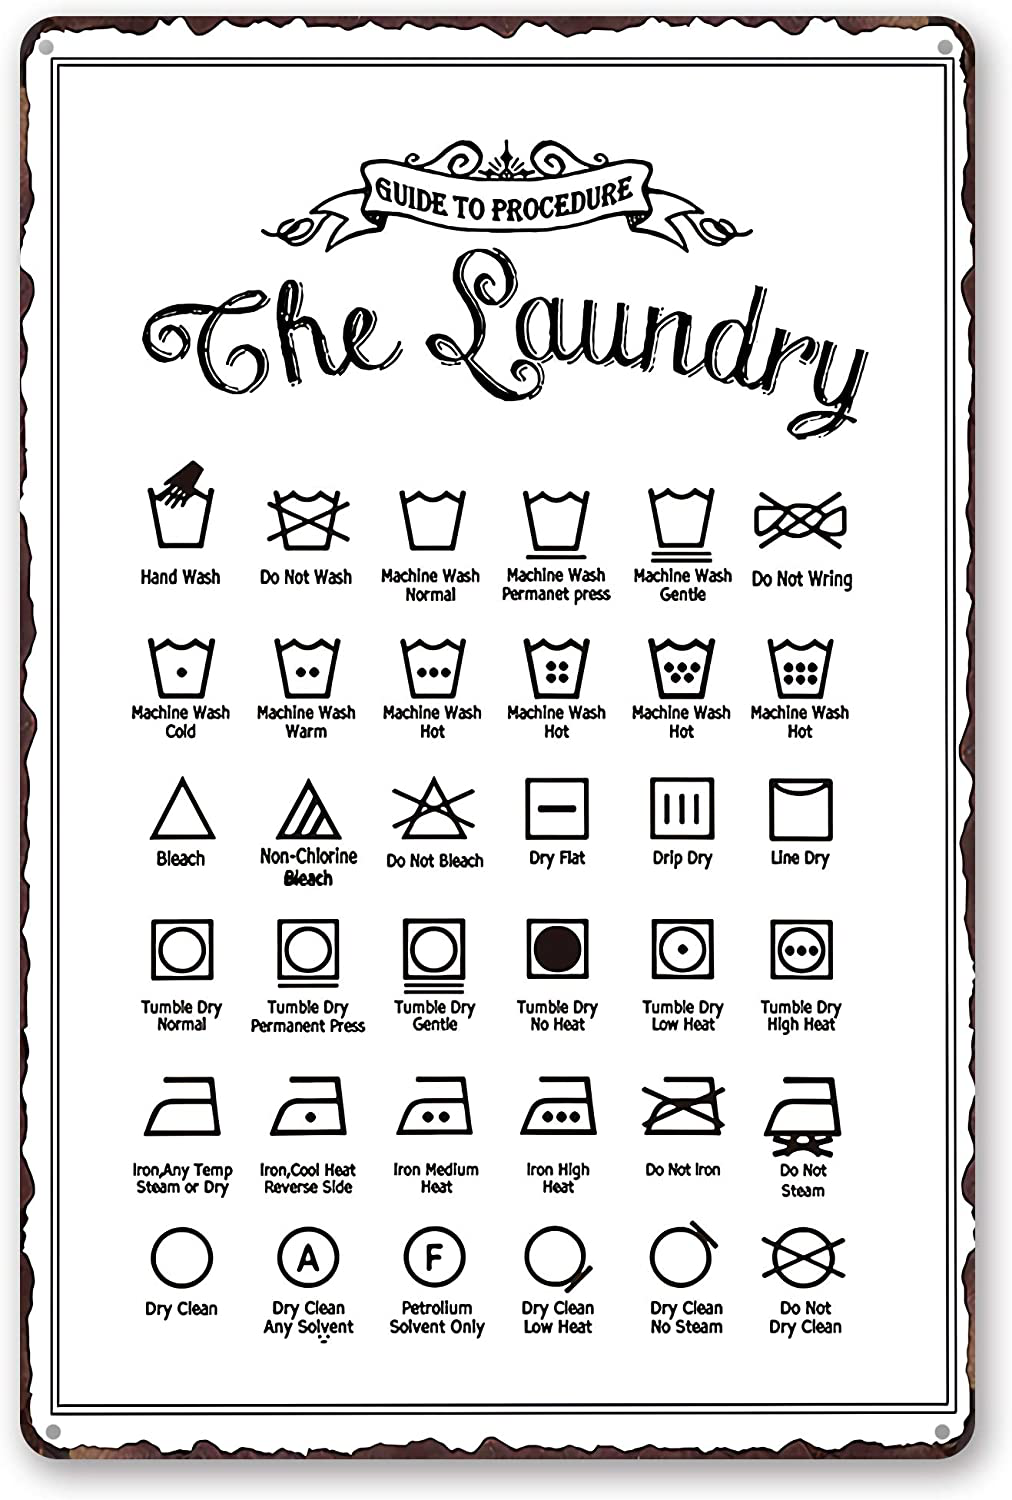 Goutoports Laundry Room Vintage Metal Sign Laundry Guide White Decorative Signs Wash Room Home Decor Art Signs 7.9x11.8 Inch